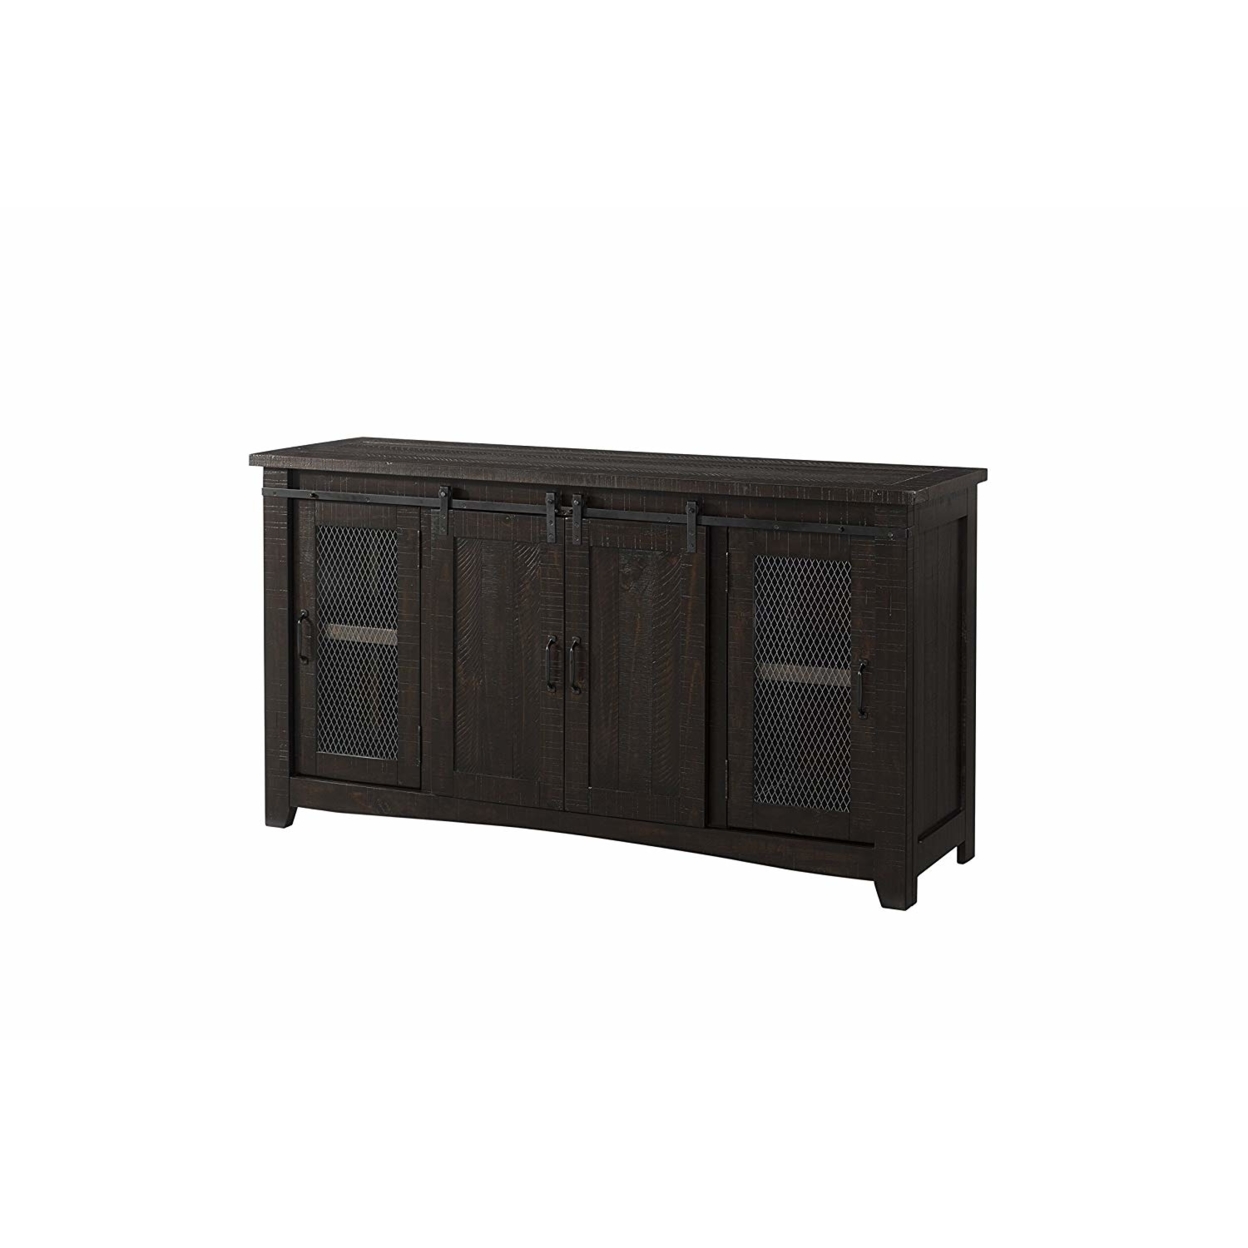 Wood And Metal TV Stand With 2 Mesh Style Doors, Espresso Brown- Saltoro Sherpi